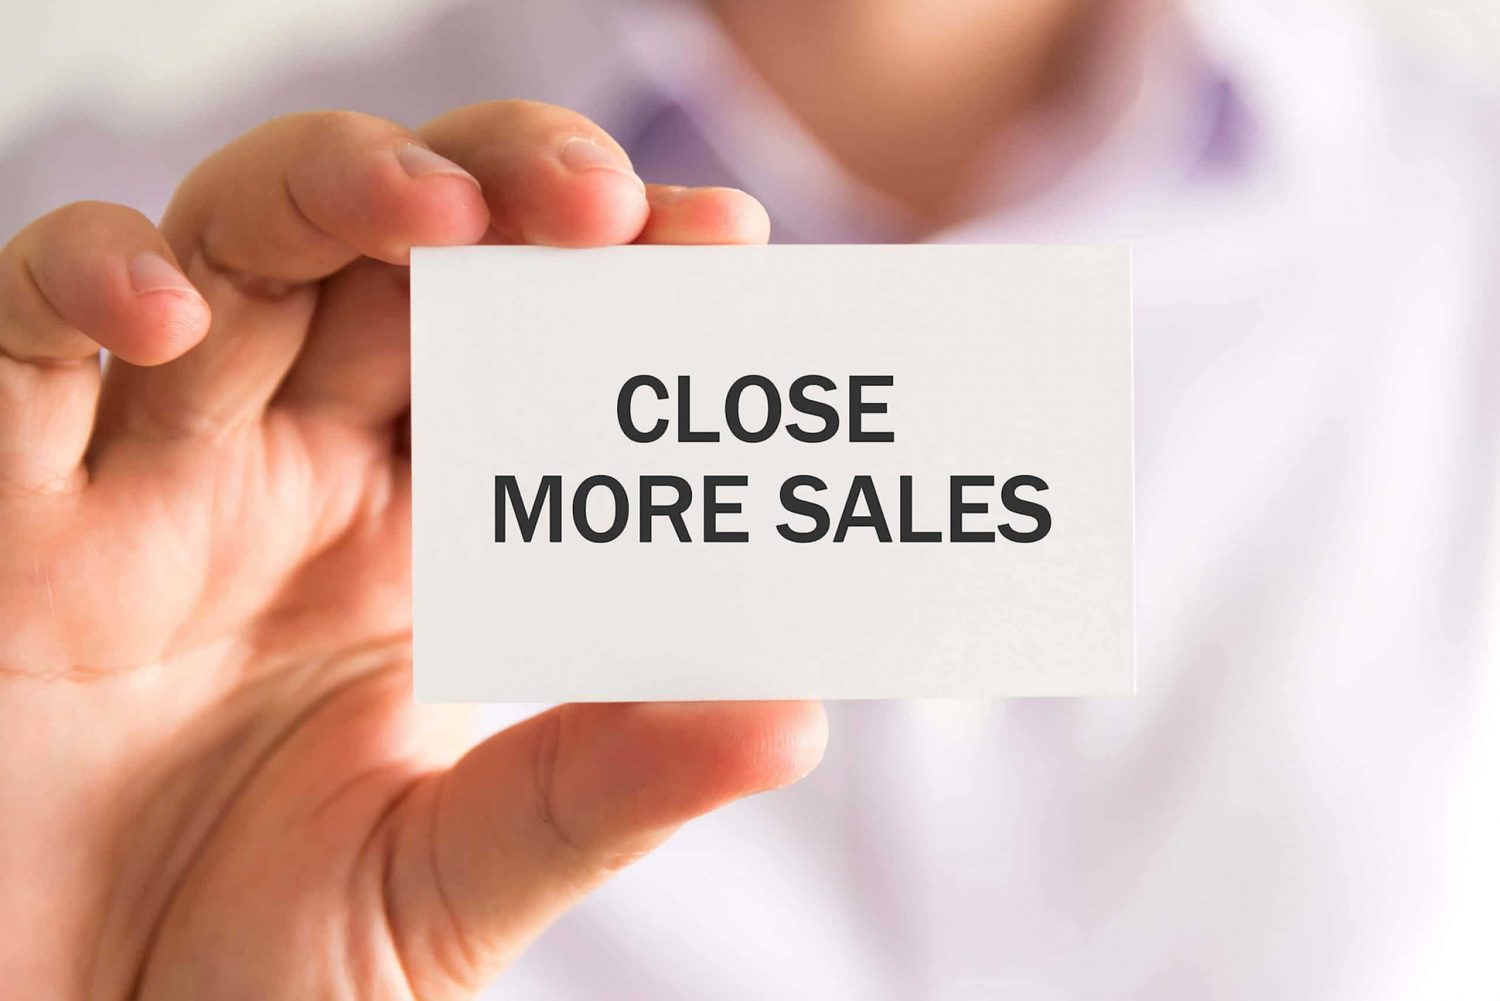 Closing: How to Close More Sales Now